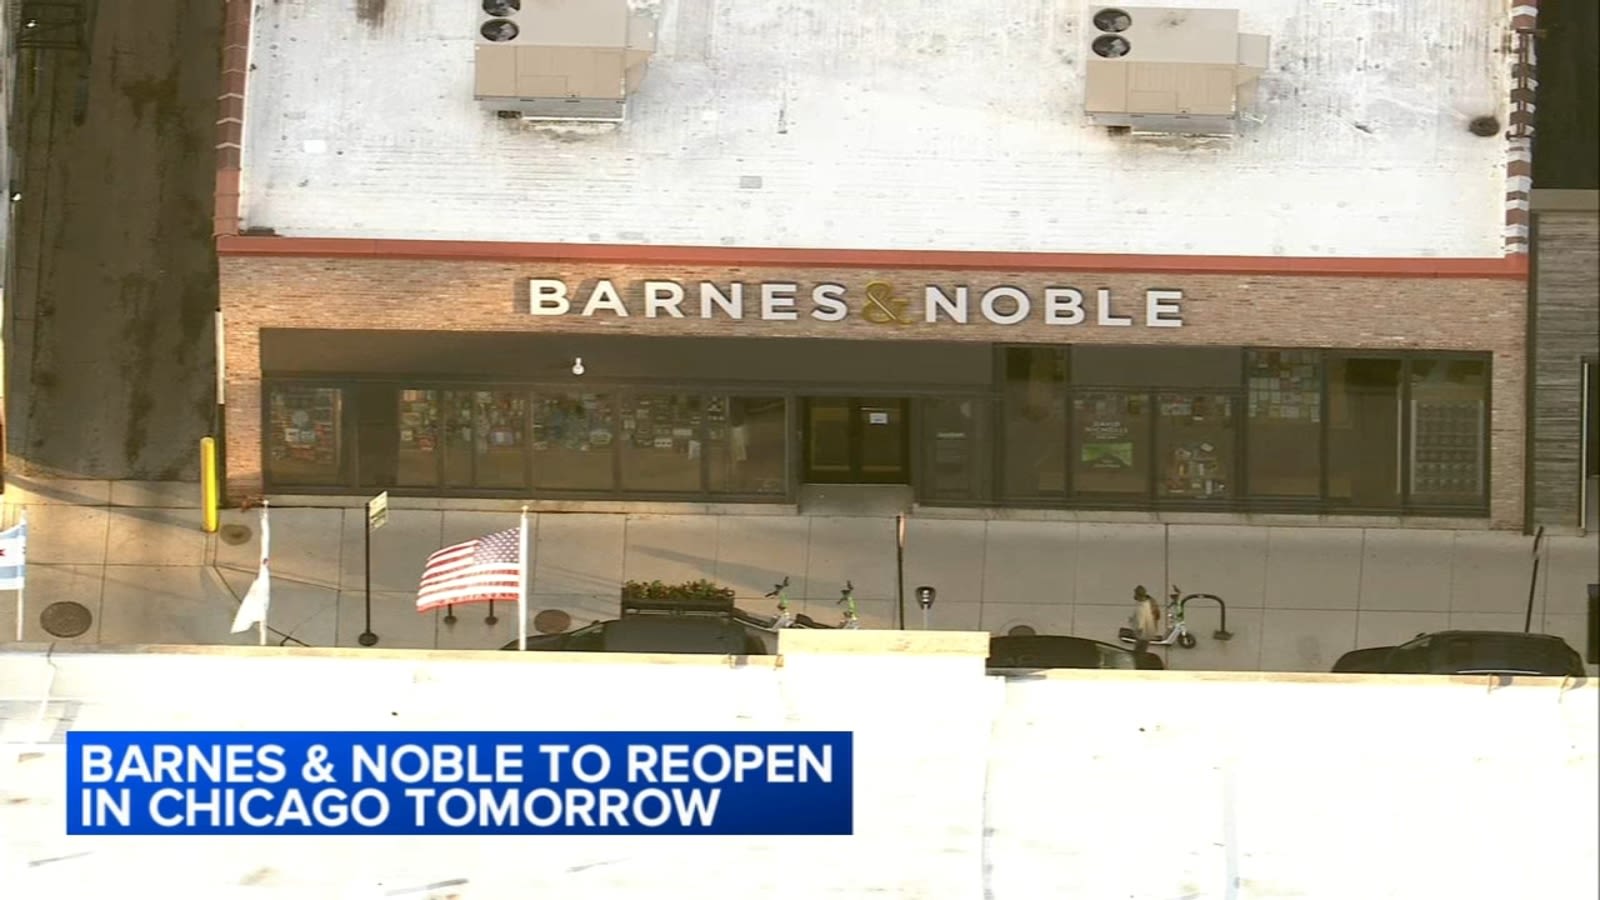 Grand opening of Barnes & Noble Lincoln Park location set for Wednesday